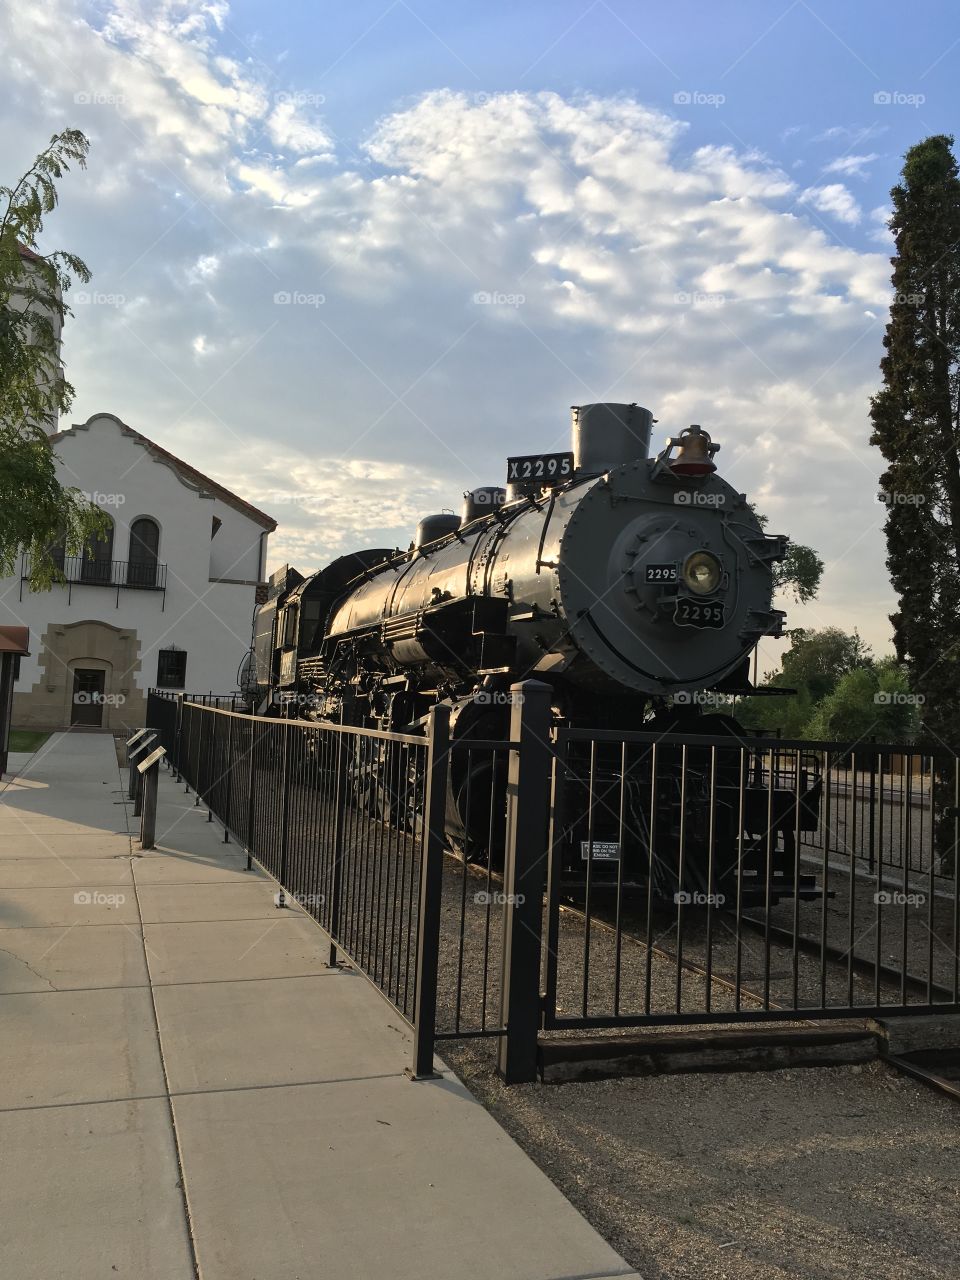 Train at the Boise depot.